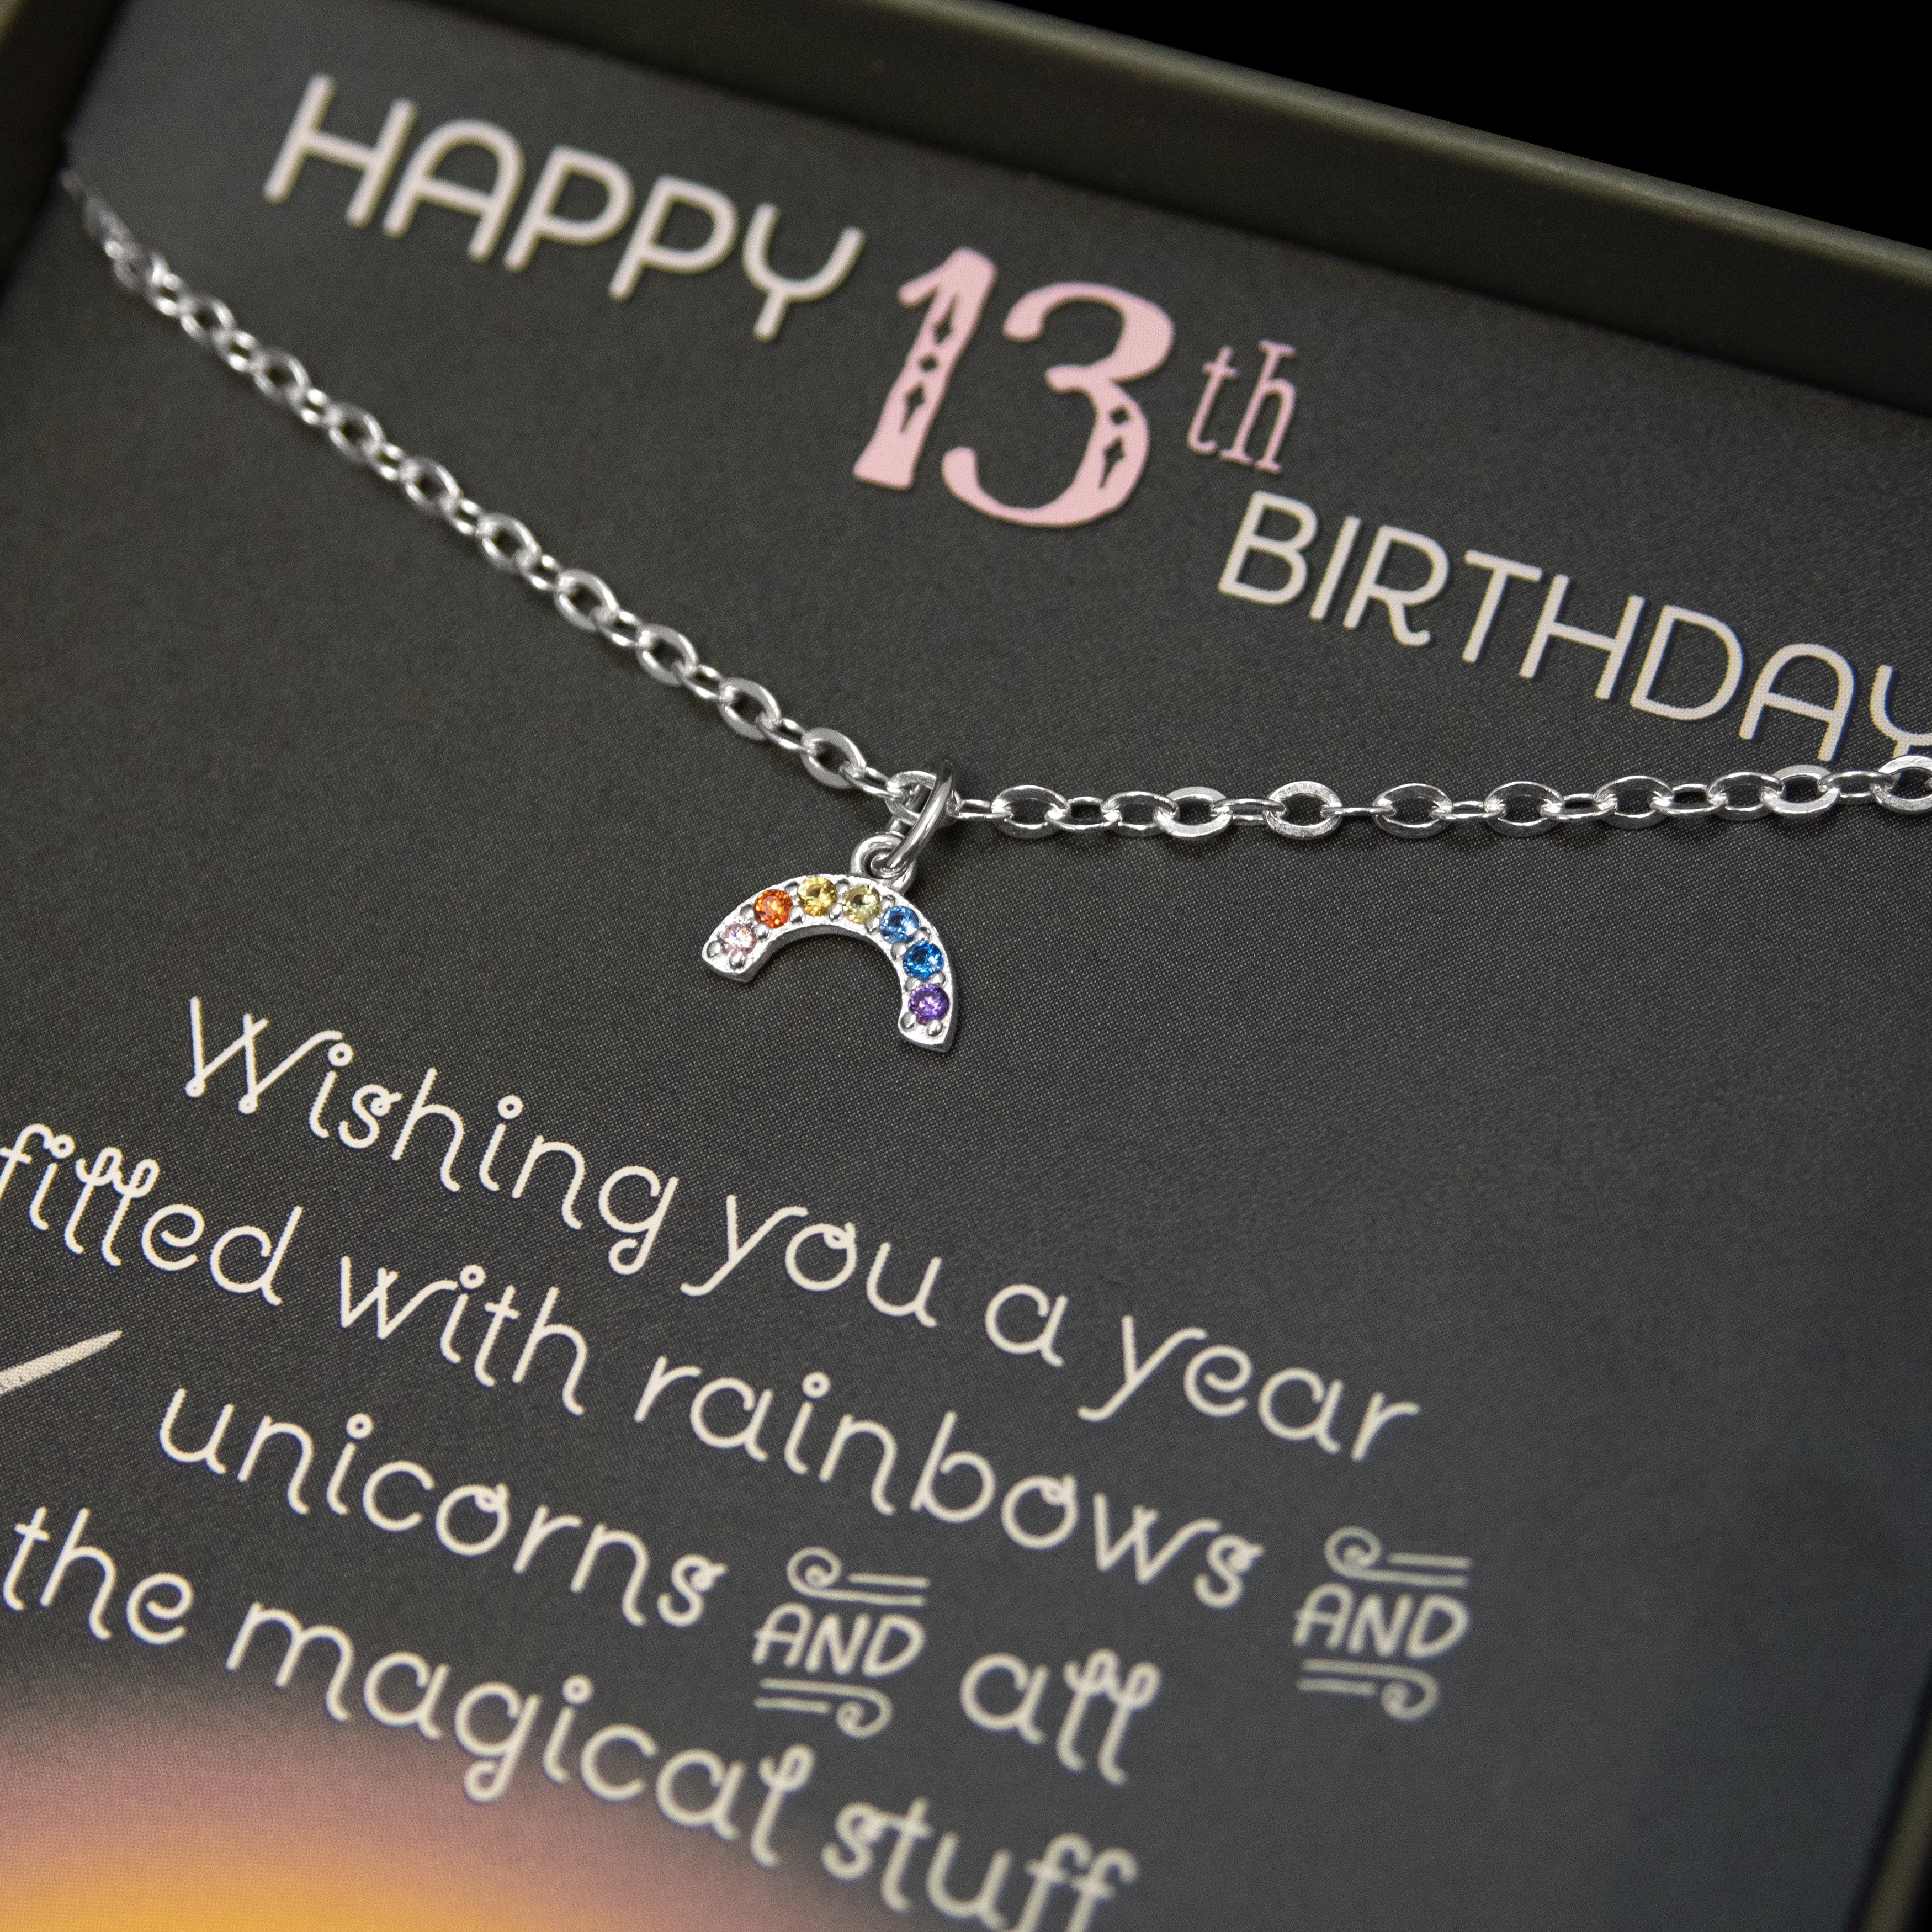 13th Birthday Gift for Her - Necklace for 13 Year Old Birthday - Beautiful Teenage Girl Birthday Pendant 14K White Gold Finish / Standard Box